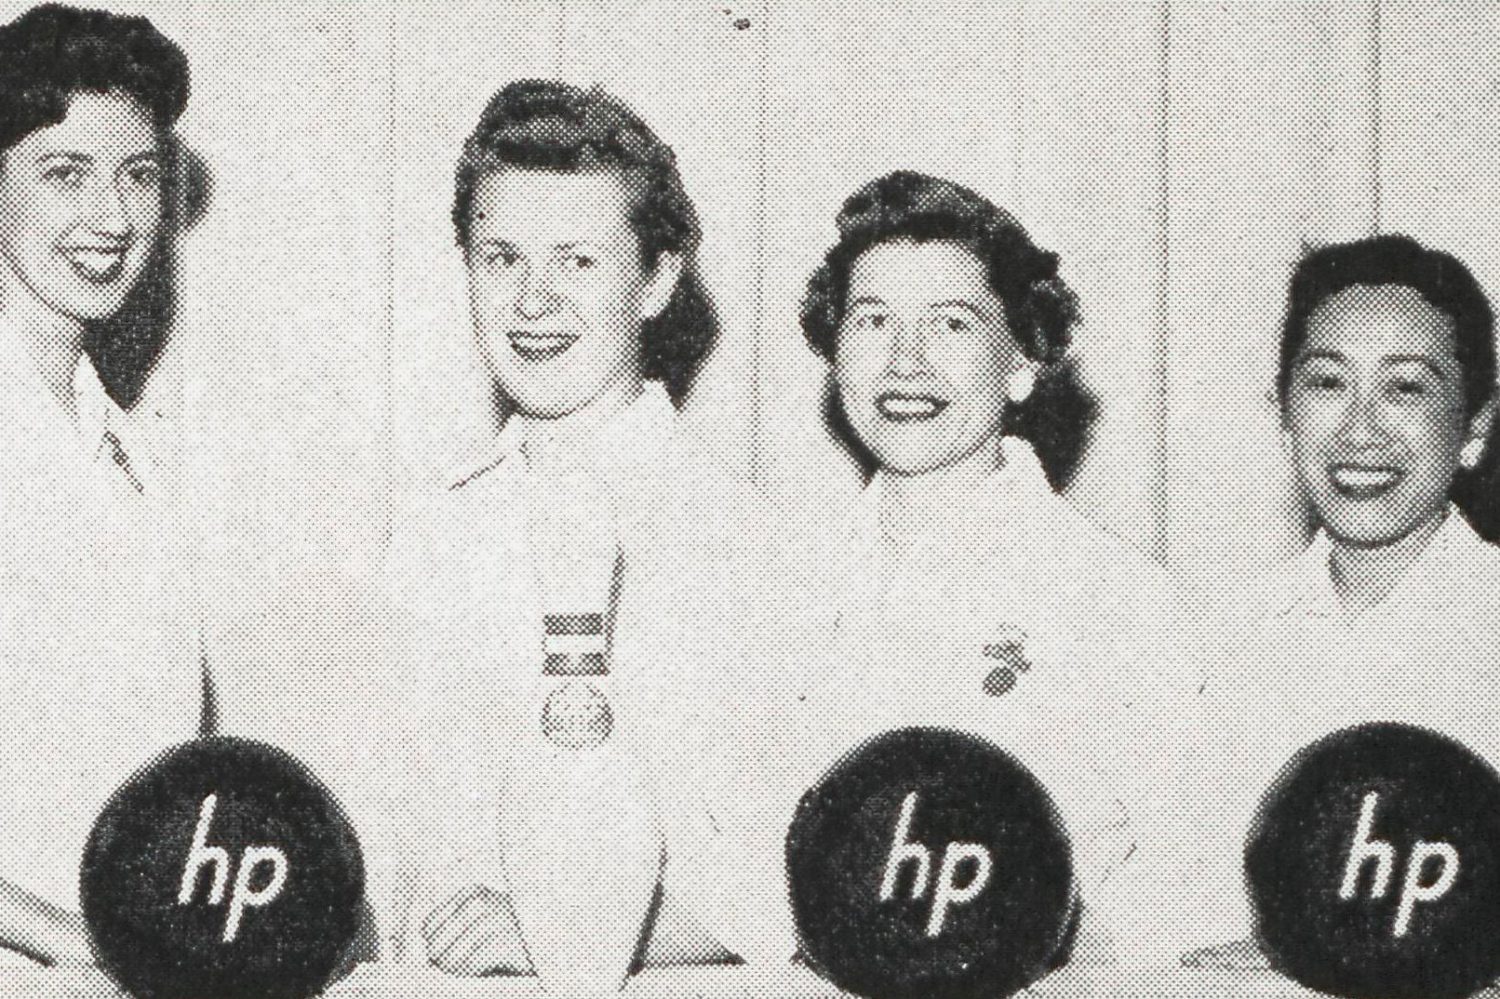 A team of HP employees who competed in the 40th Annual Women?s International Bowling Congress in 1958.